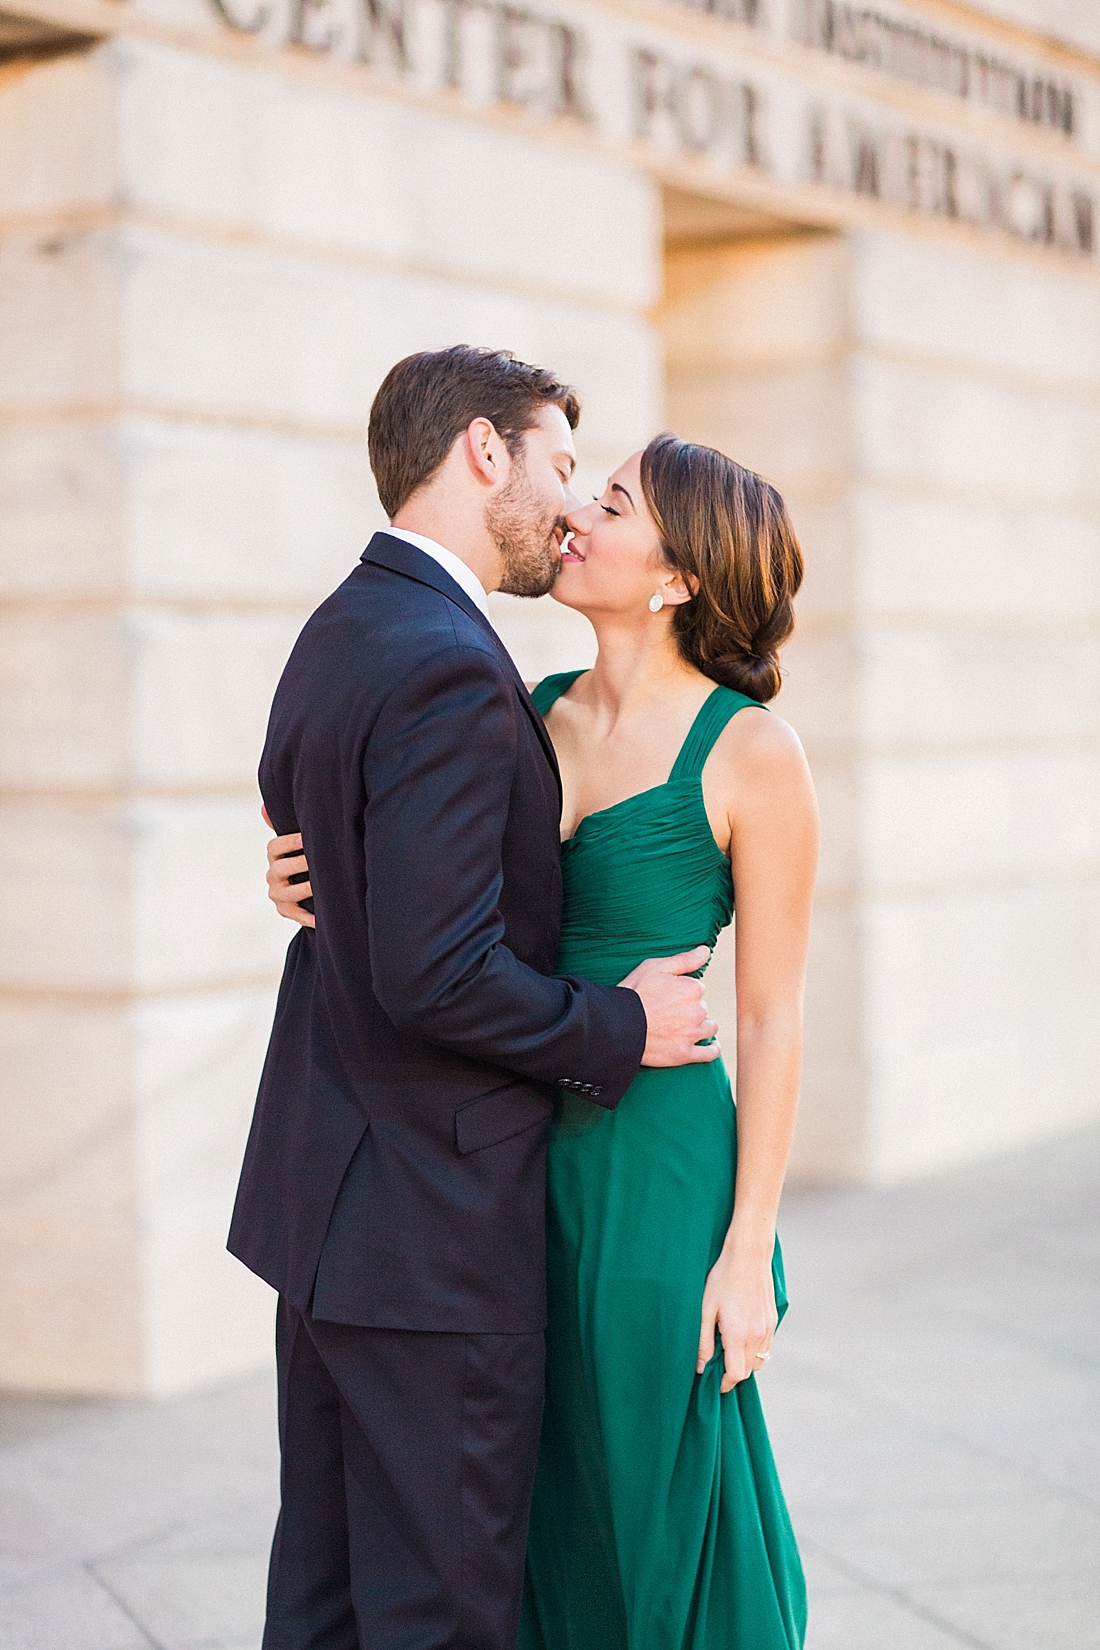 Washington DC anniversary session at the National Portrait Gallery | Abby Grace Photography